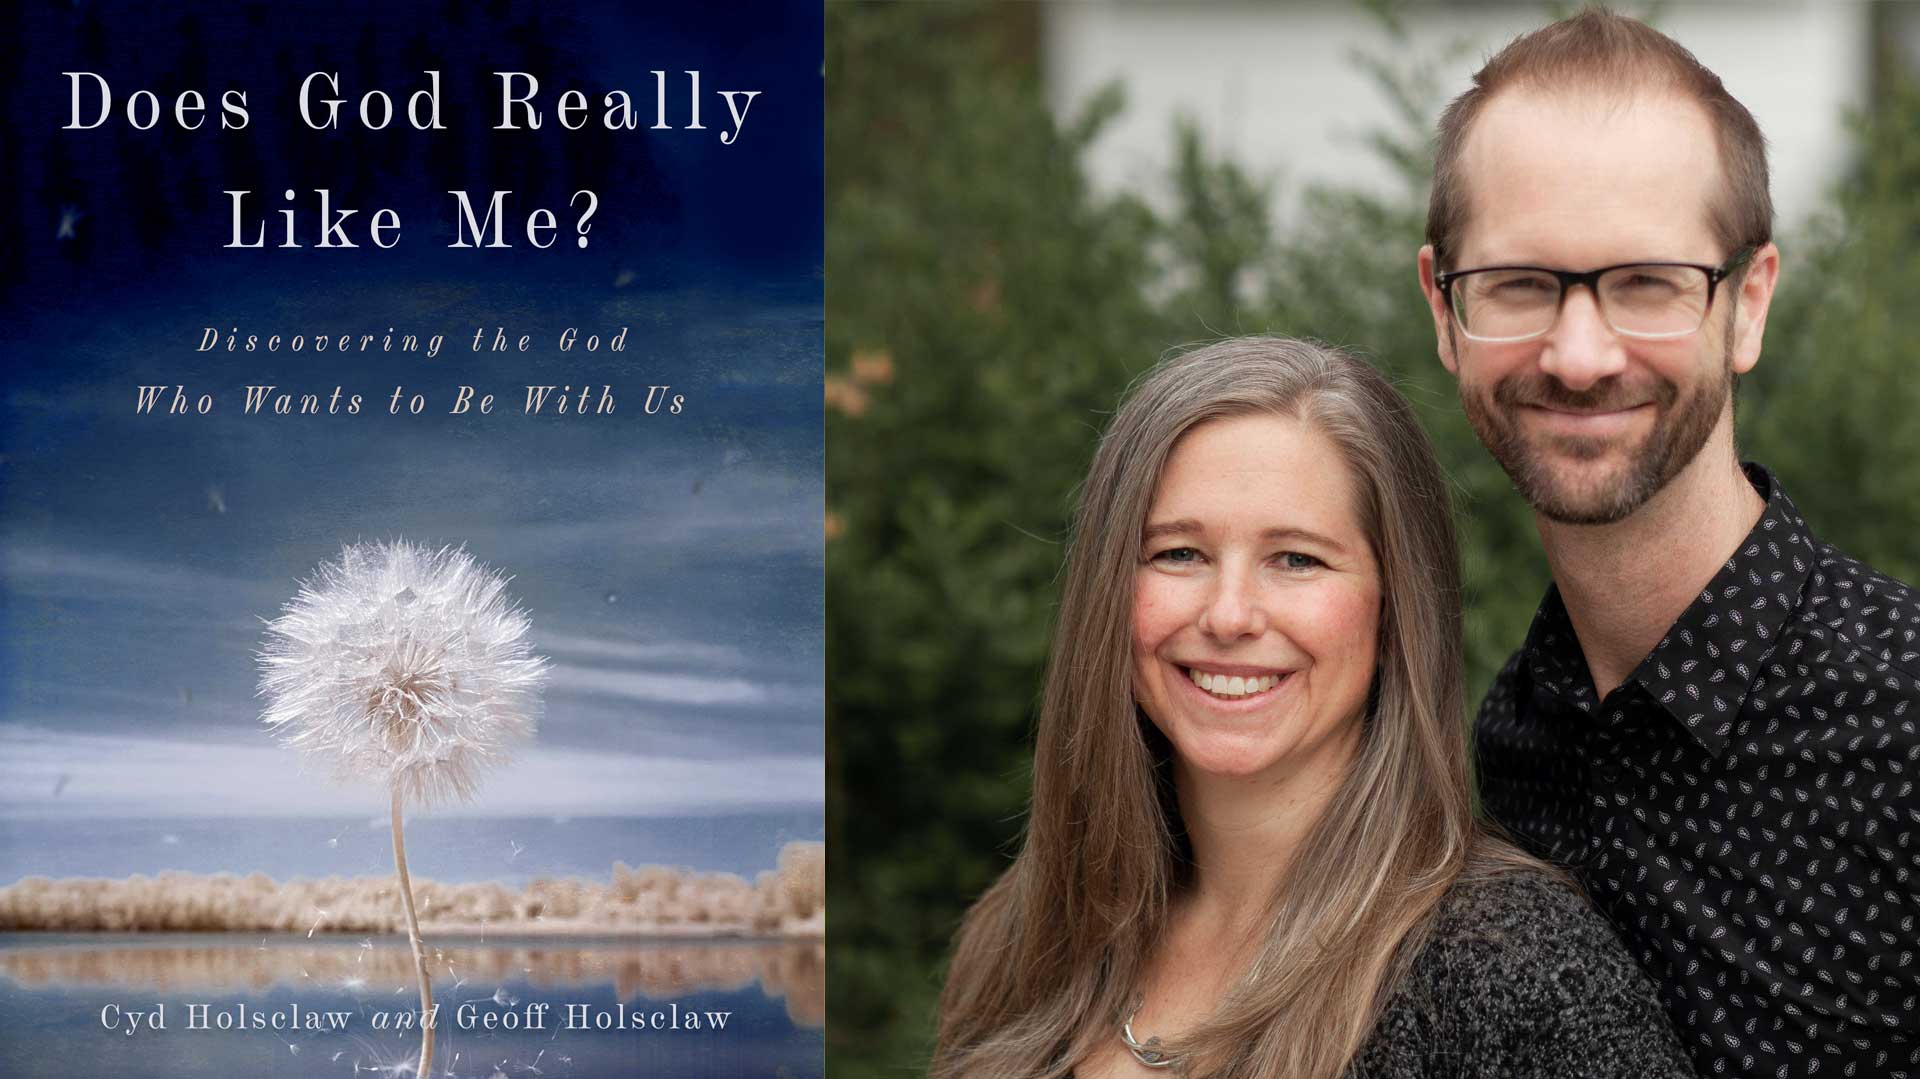 Does God Really Like Me? Interview with Cyd and Geoff Holsclaw